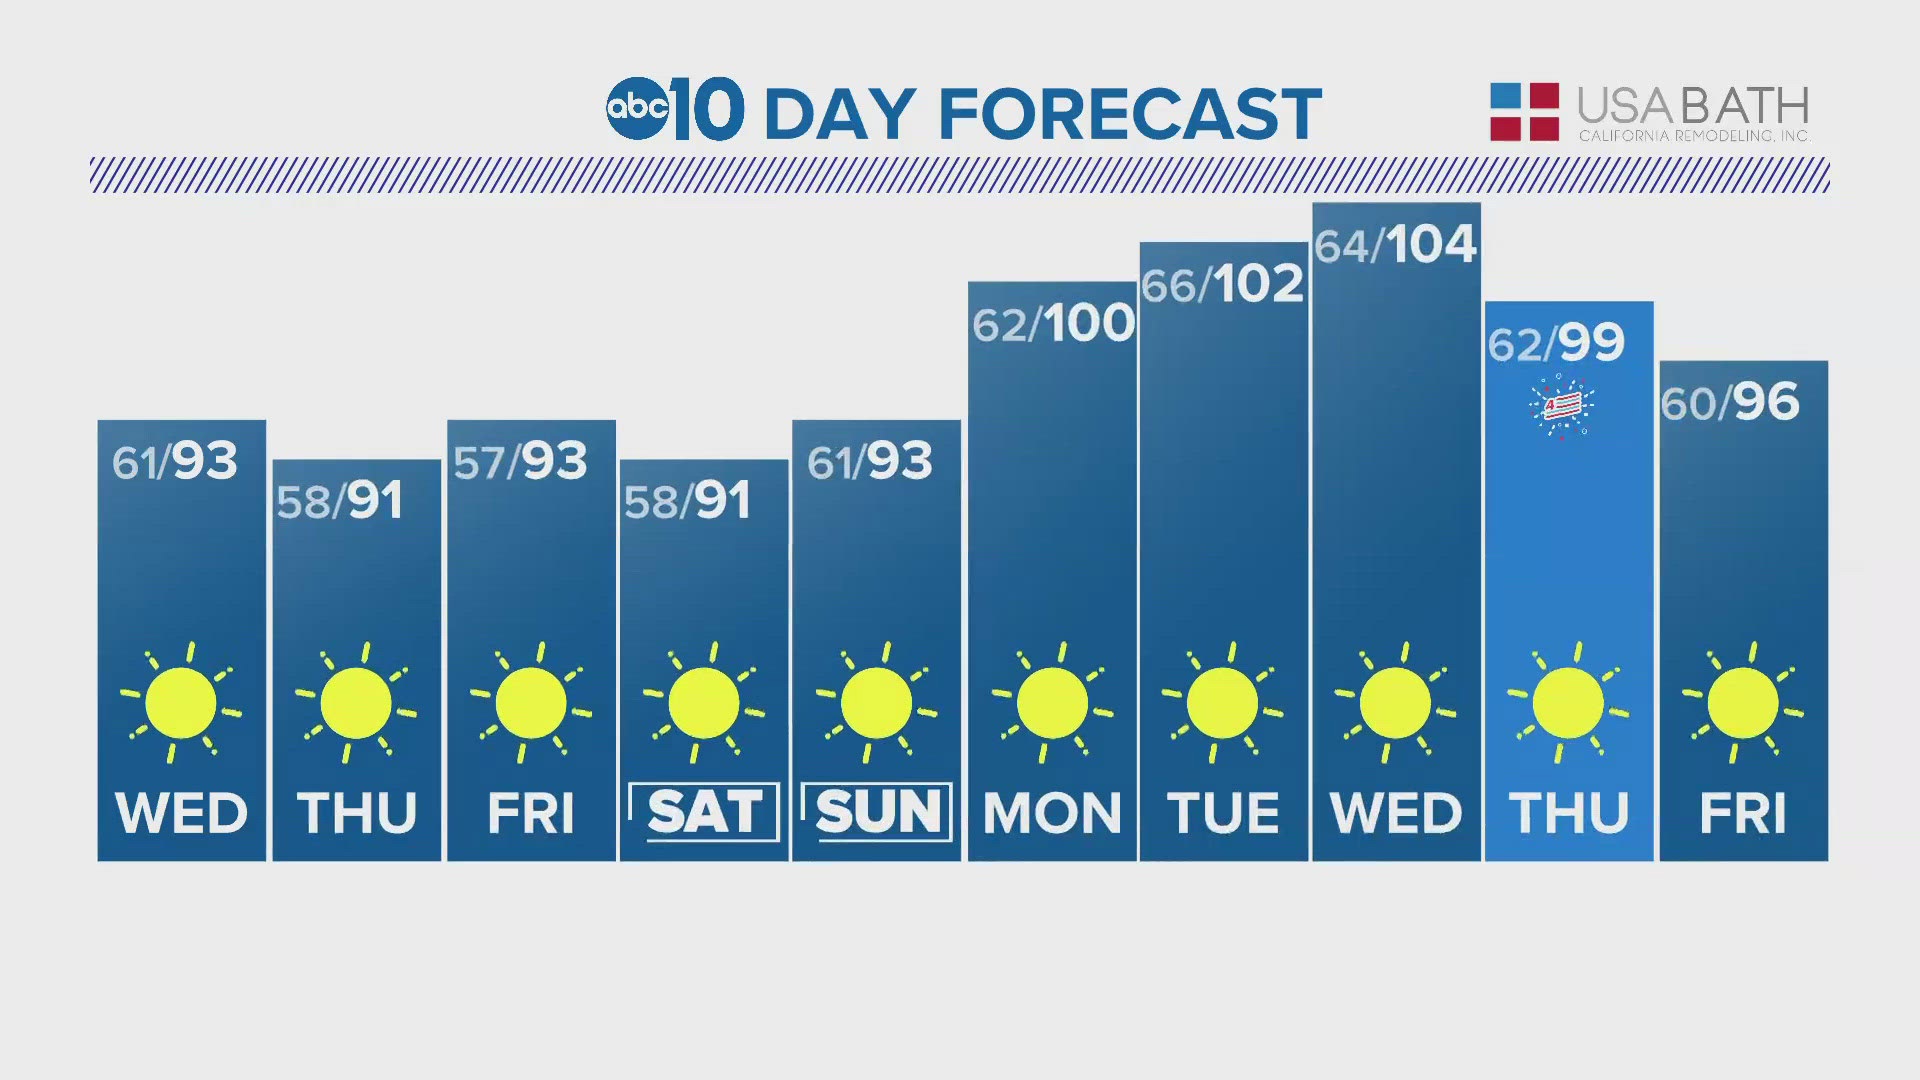 ABC10's Jordan Tolbert tells us what to expect for the next 10 days of weather.